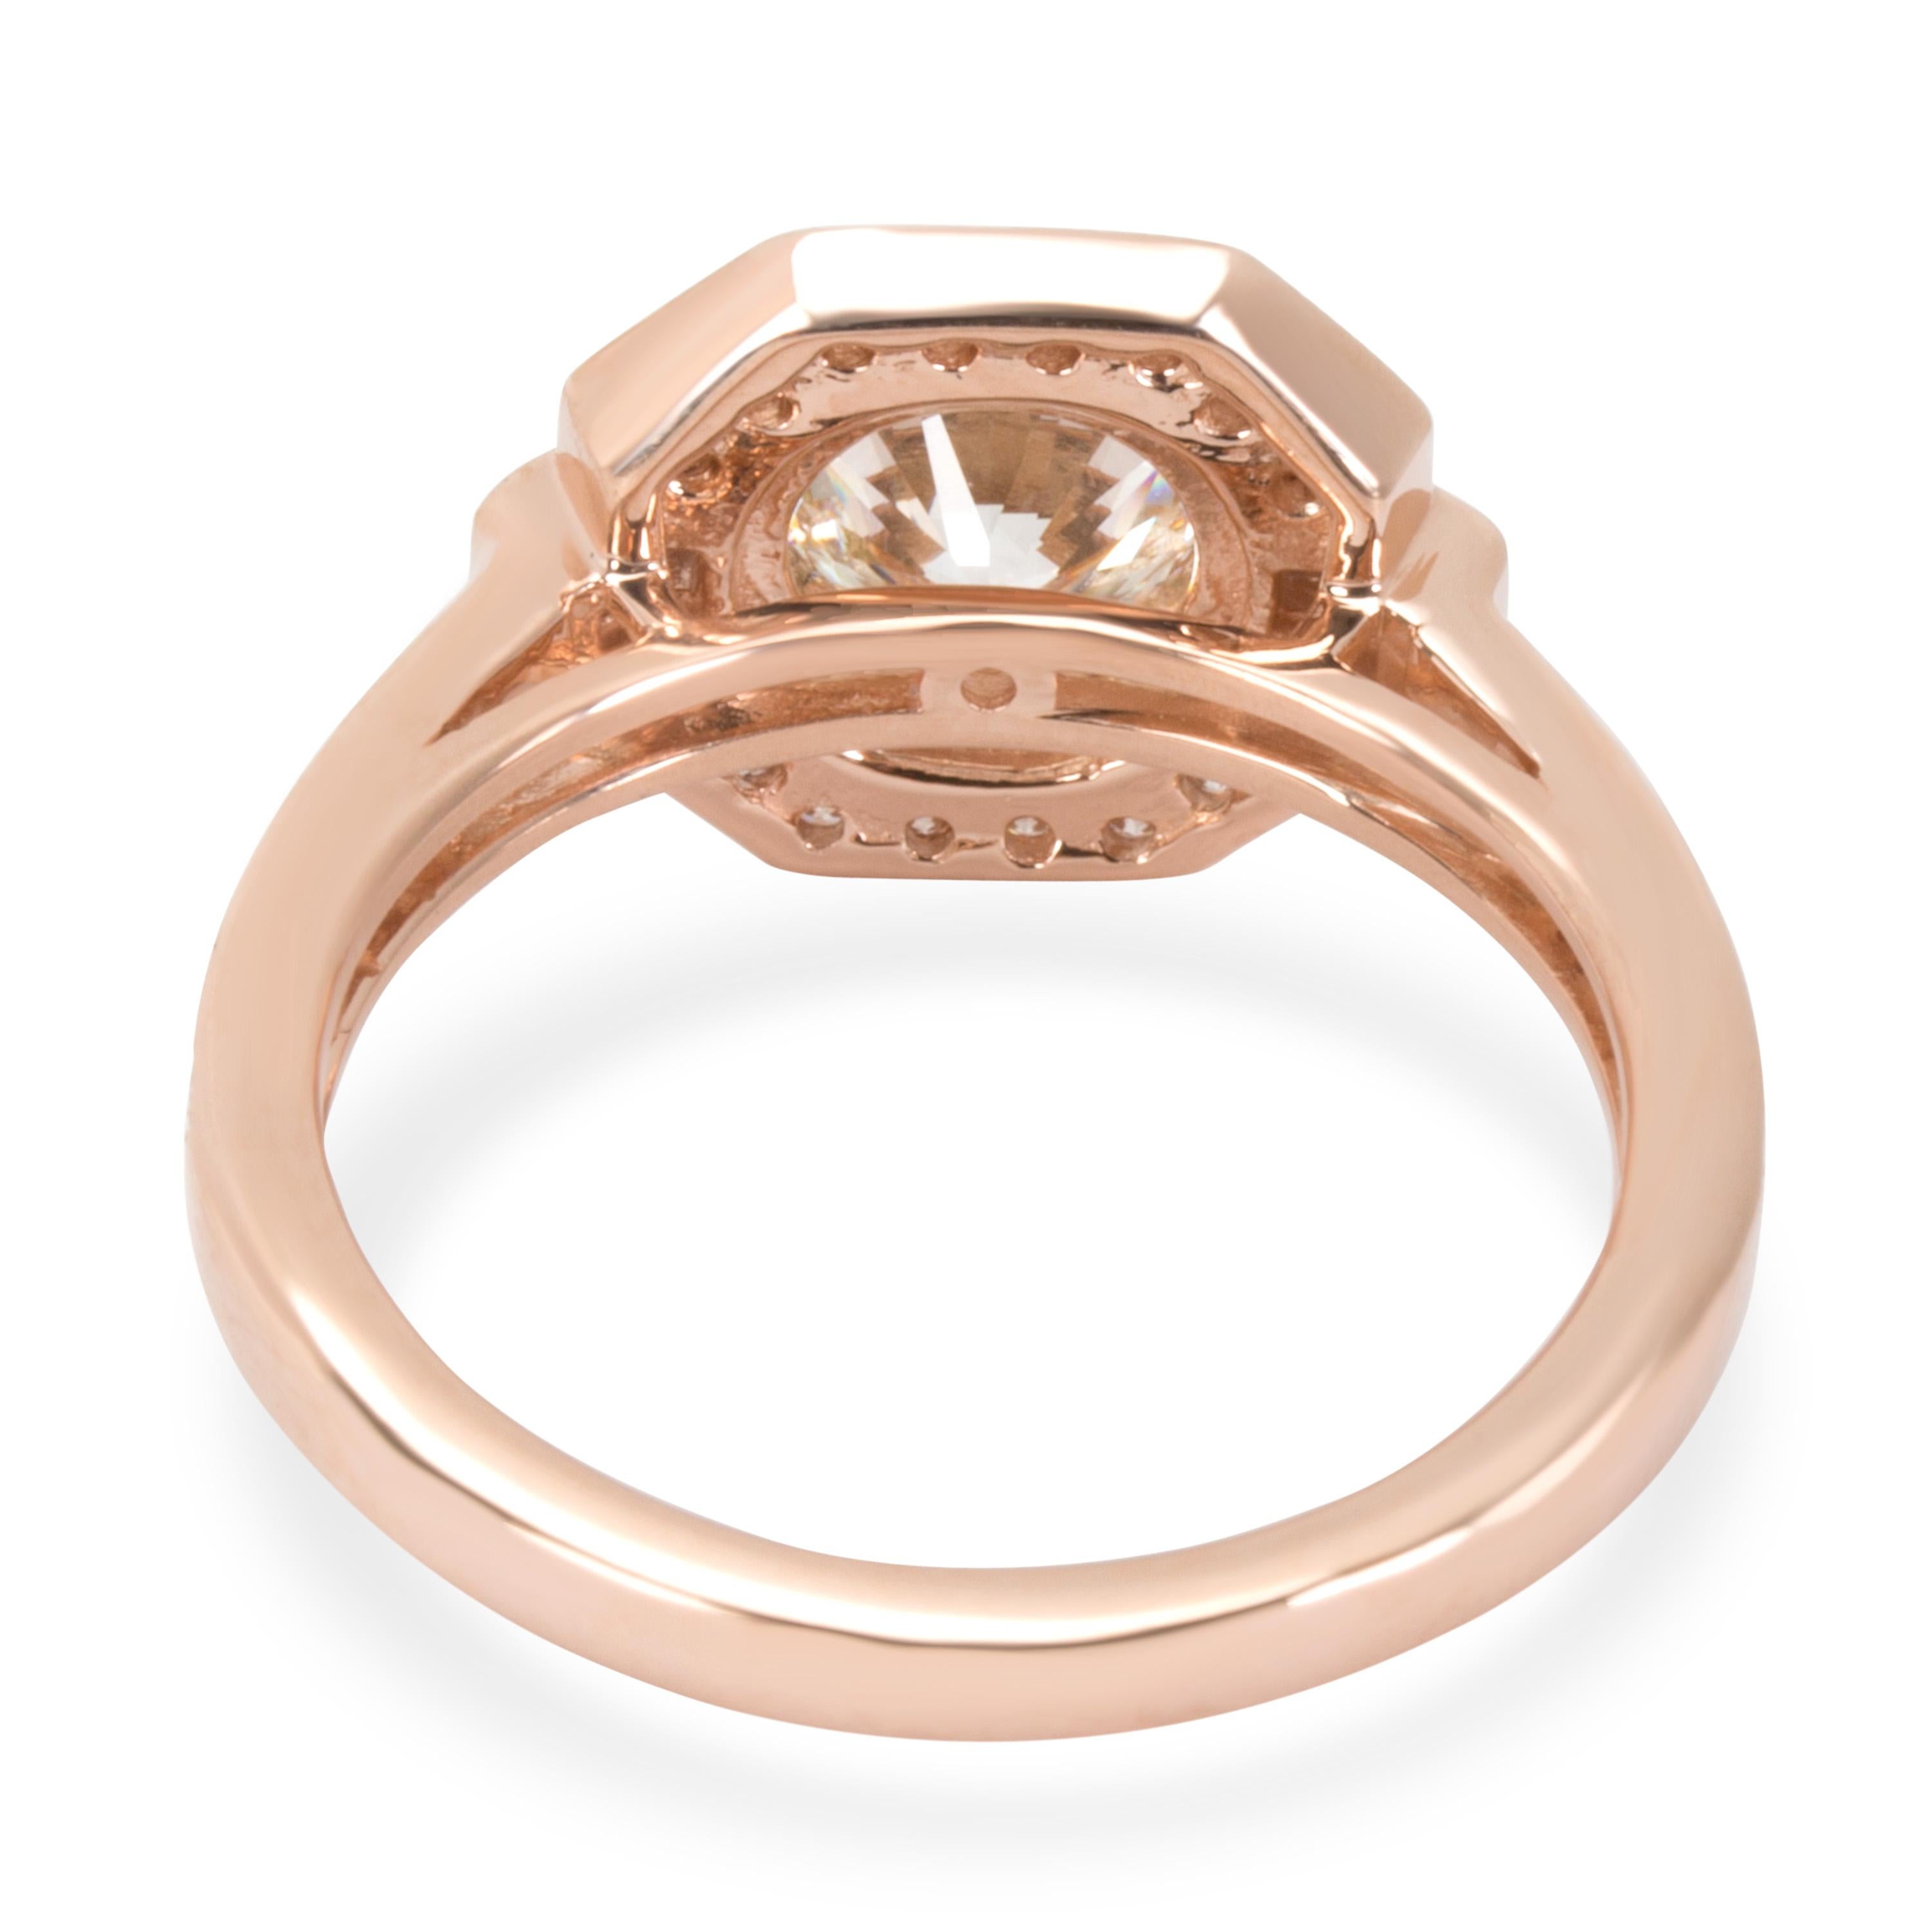 AGS Certified James Allen Diamond Engagement Ring in 14K Rose Gold

PRIMARY DETAILS
SKU: 096089
Listing Title: AGS Certified James Allen Diamond Engagement Ring in 14K Rose Gold
Condition Description: Est. retail price 8,000 USD. Comes with copy of